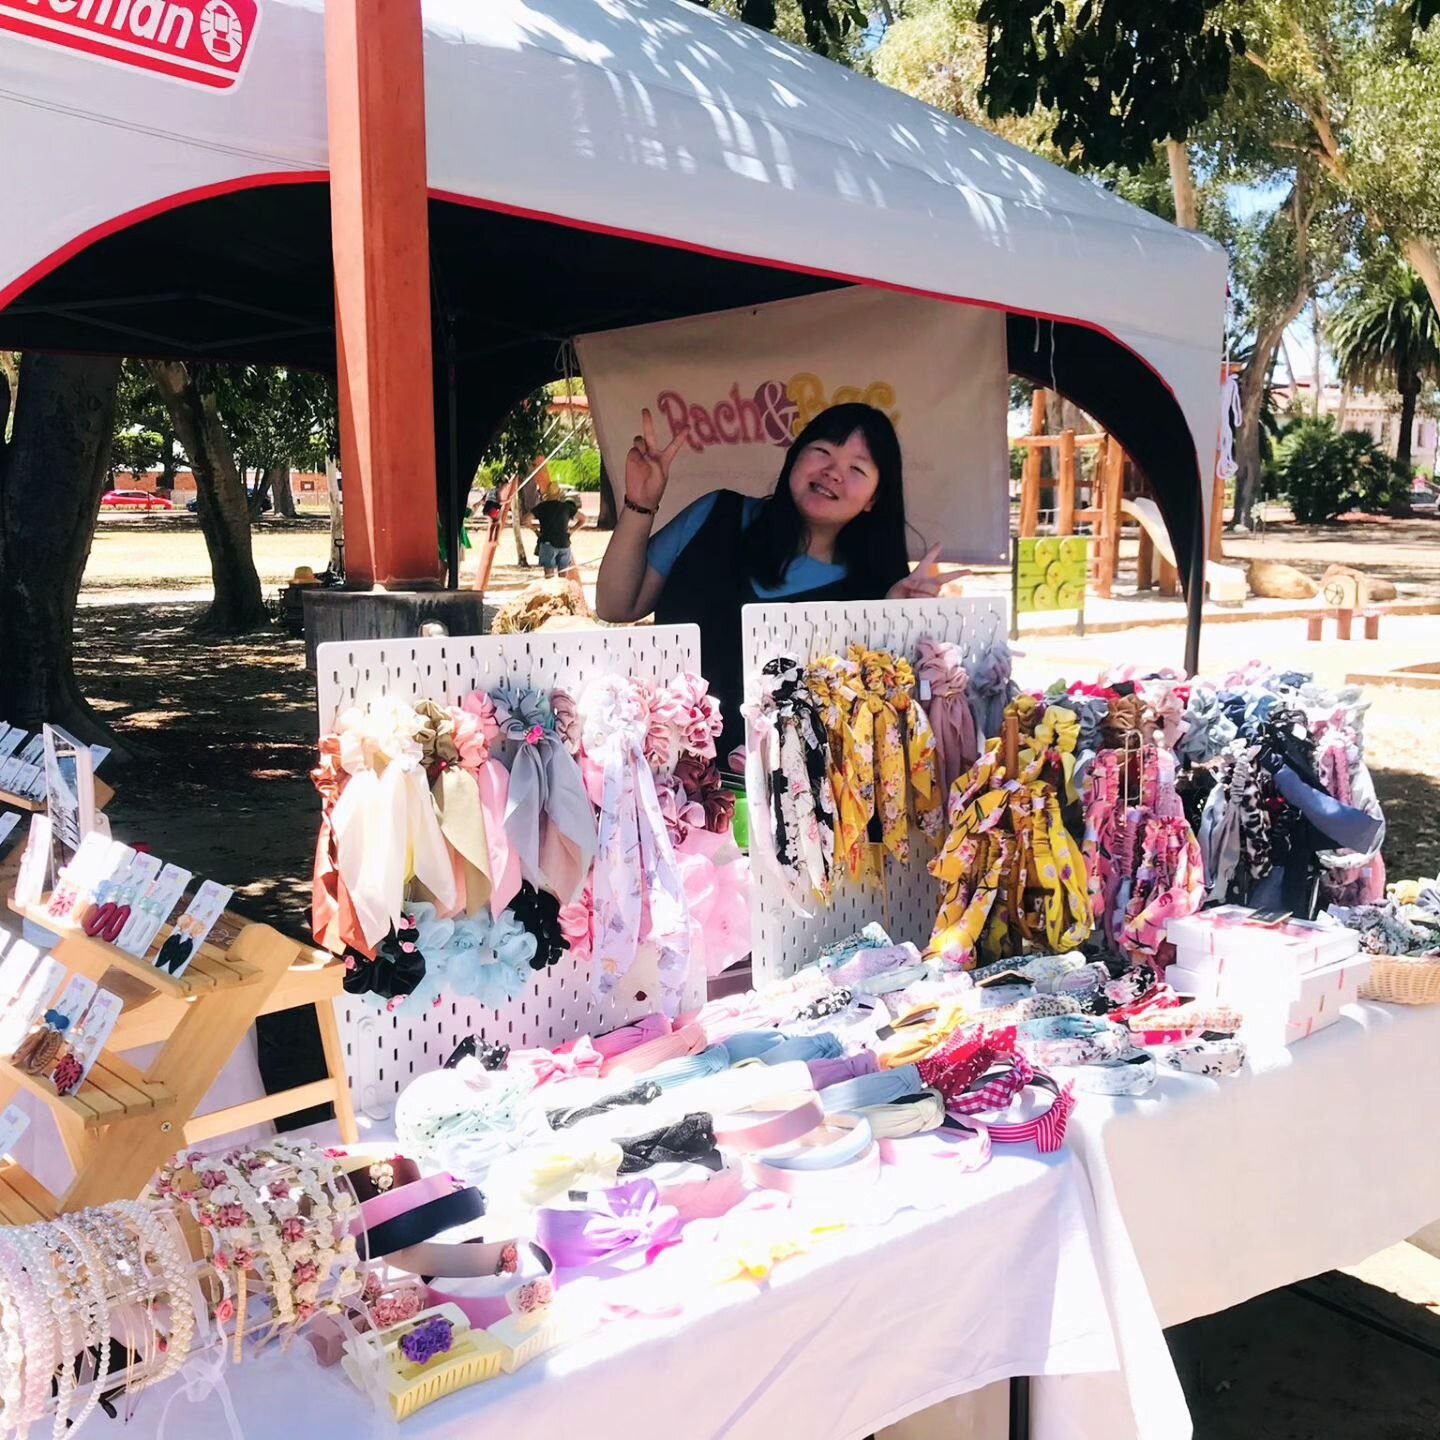 Thanks so much to everyone who visited our stall @stirlingsquaremarkets Christmas market!! Many thanks to all who bought their gifts from us, we hope our hair accessories and jewellery bring a burst of joy to the ones who receive it🥰. 

.

.

.

#st